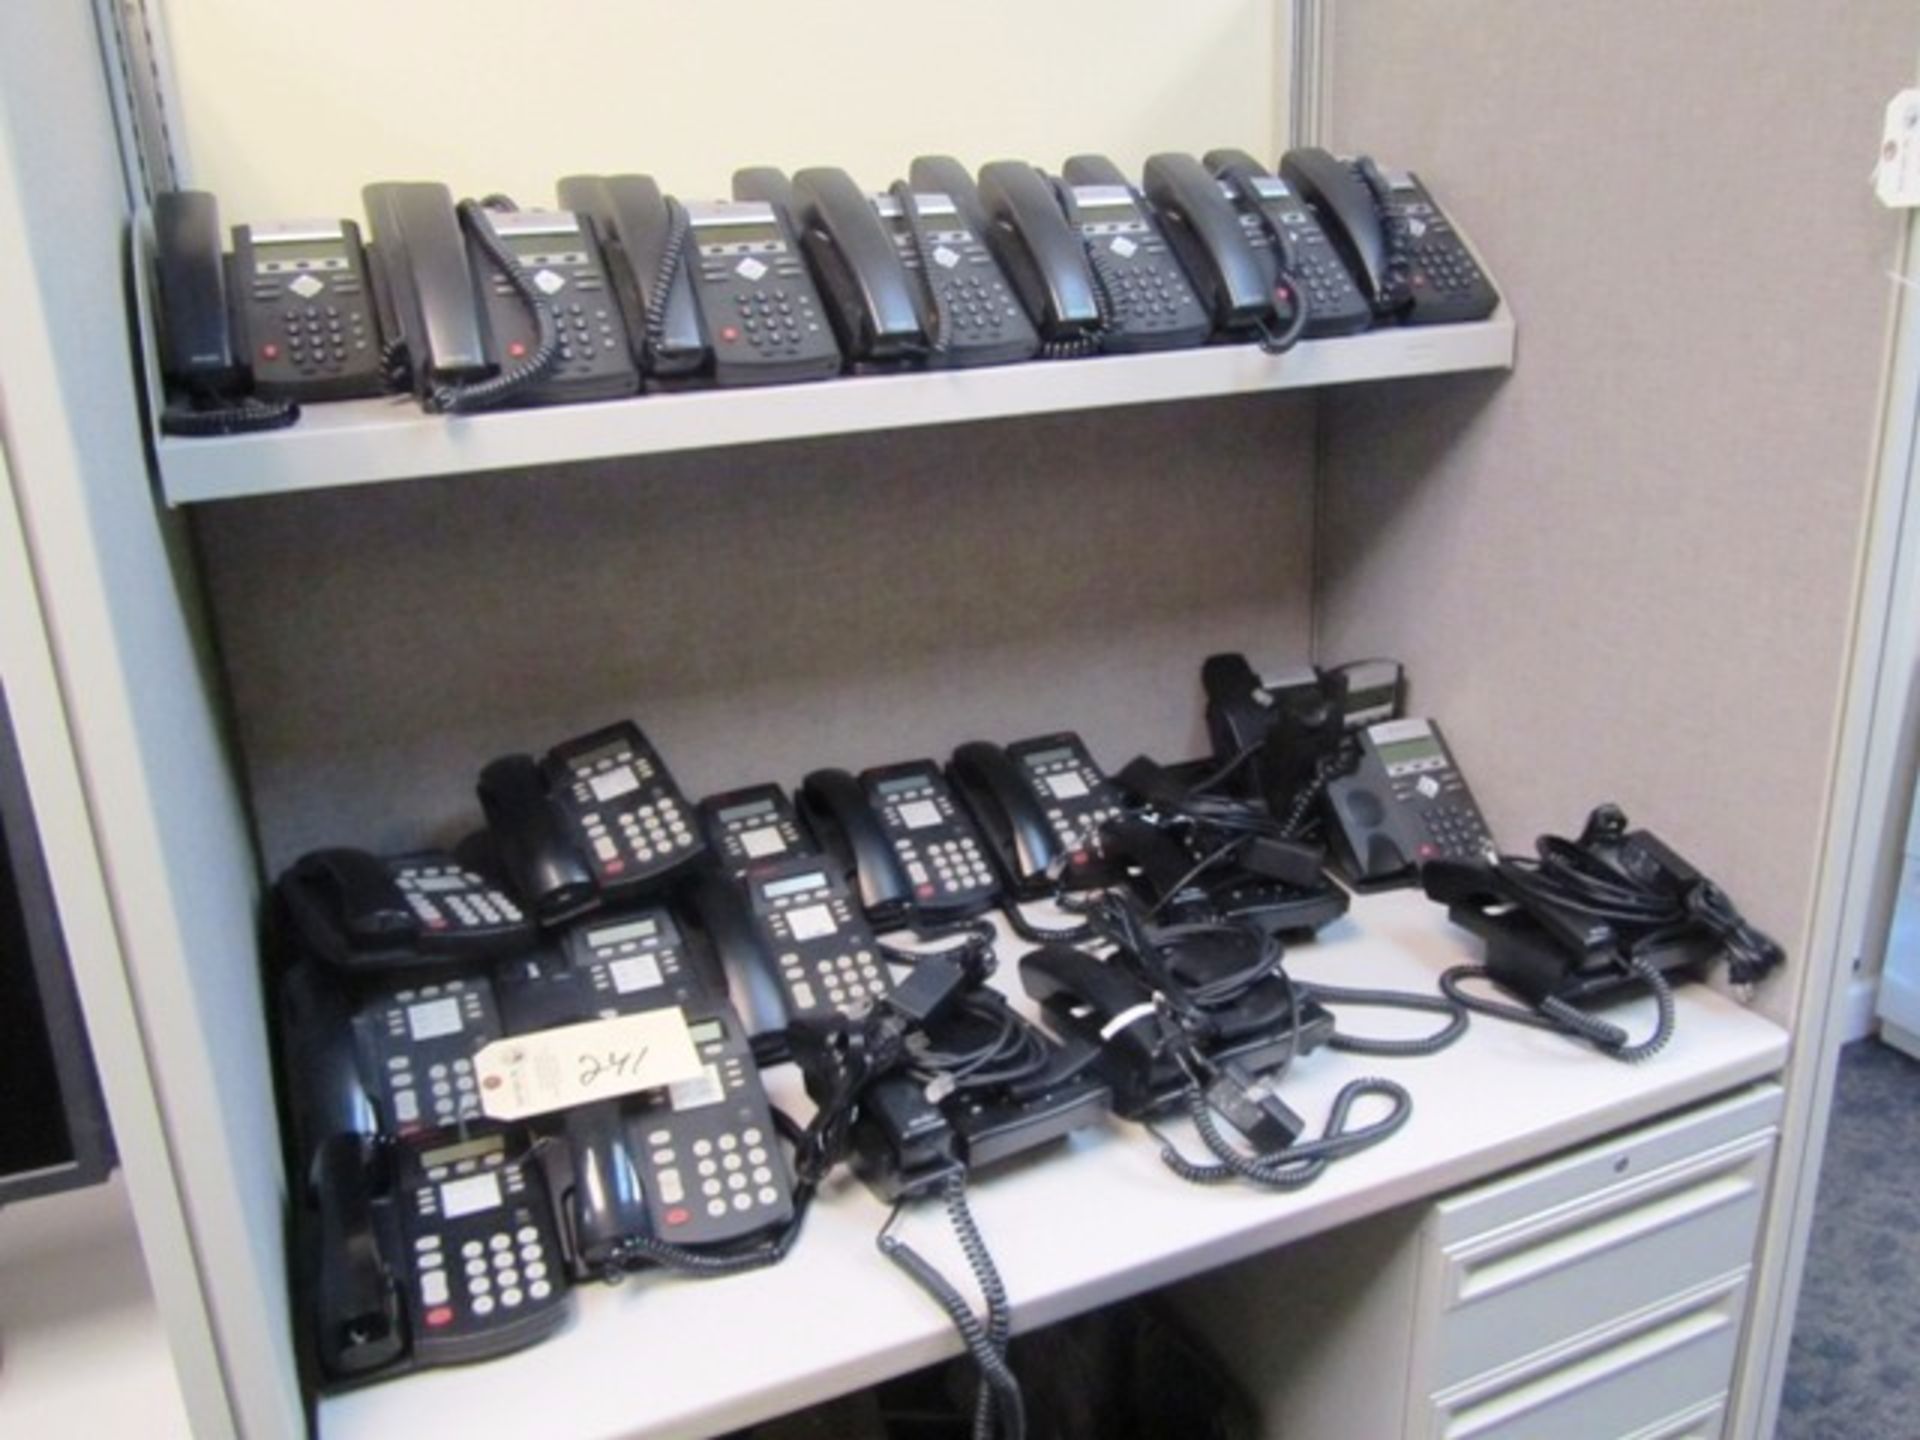 Approx (40) Avaya & Polycon Office Phones with Phone System, *located Oak Lawn, IL